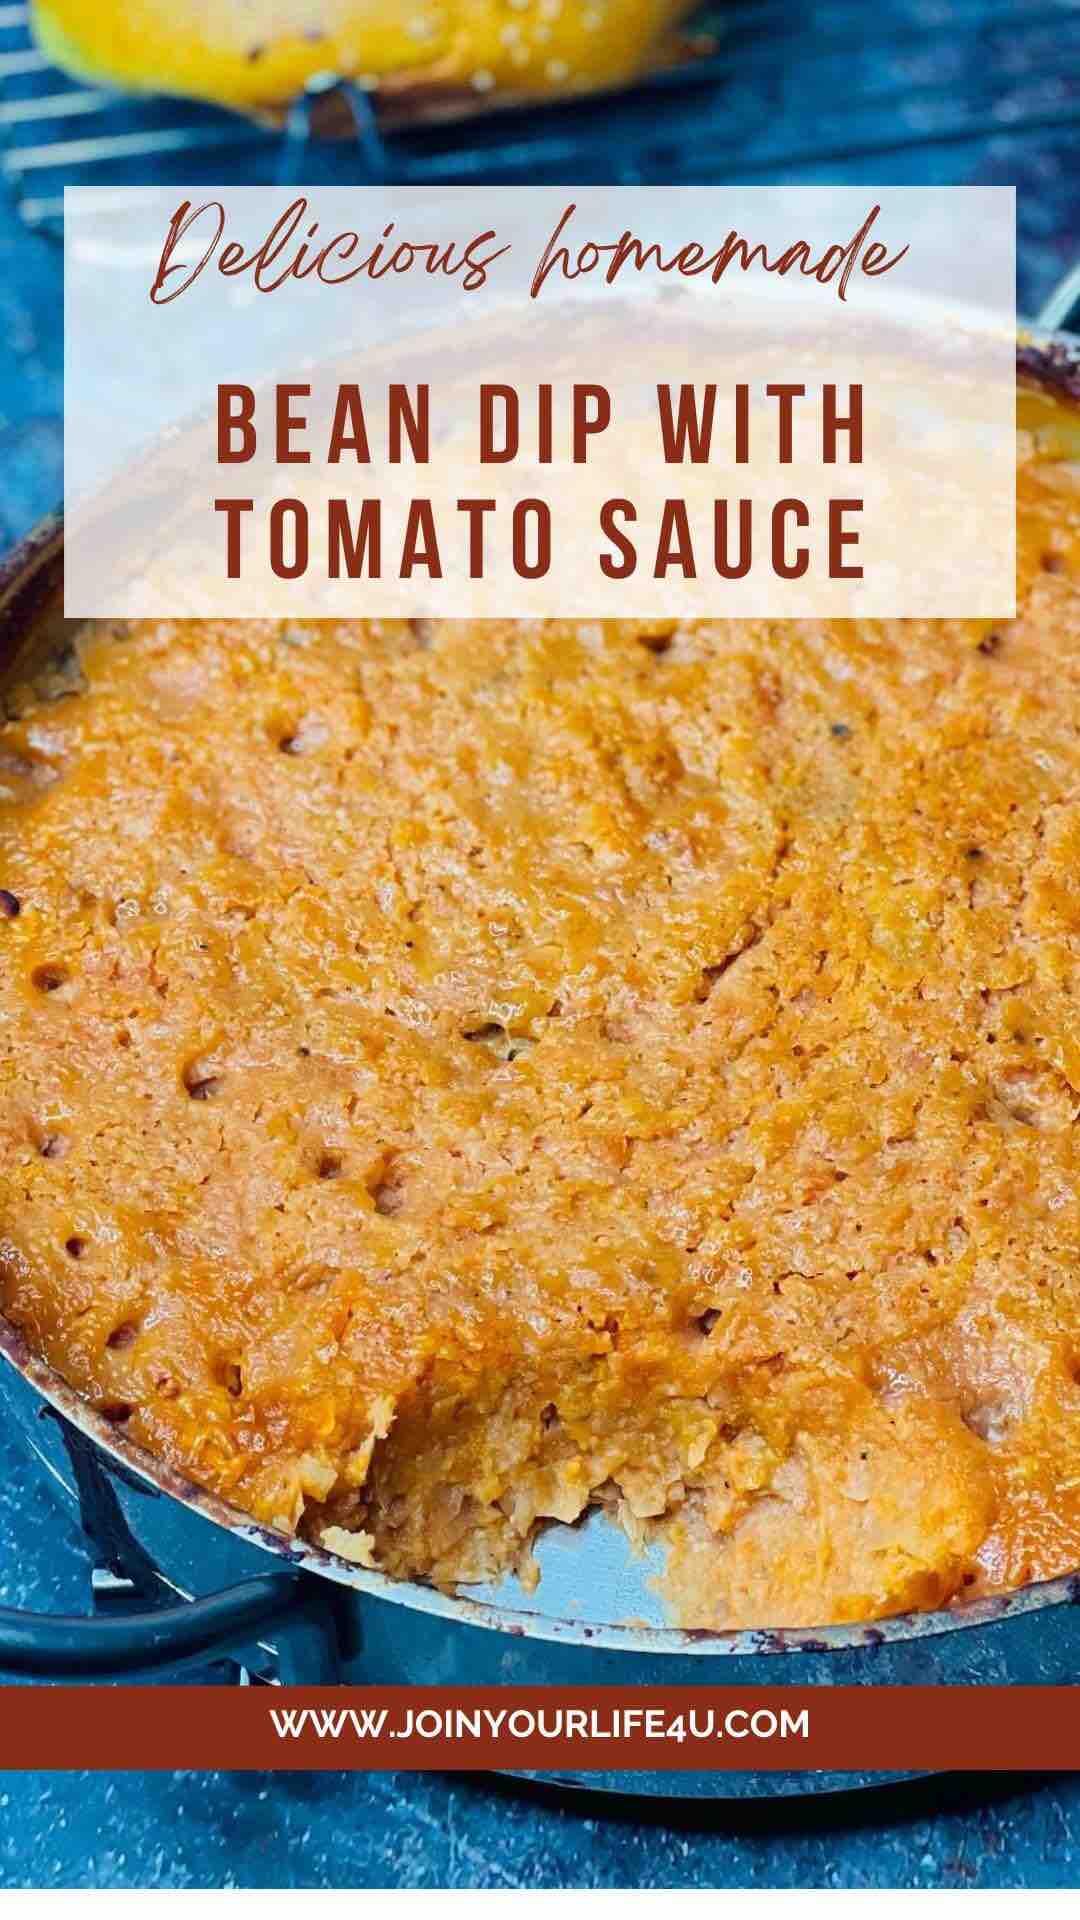 Garlic and Bean Dip with Tomato Sauce